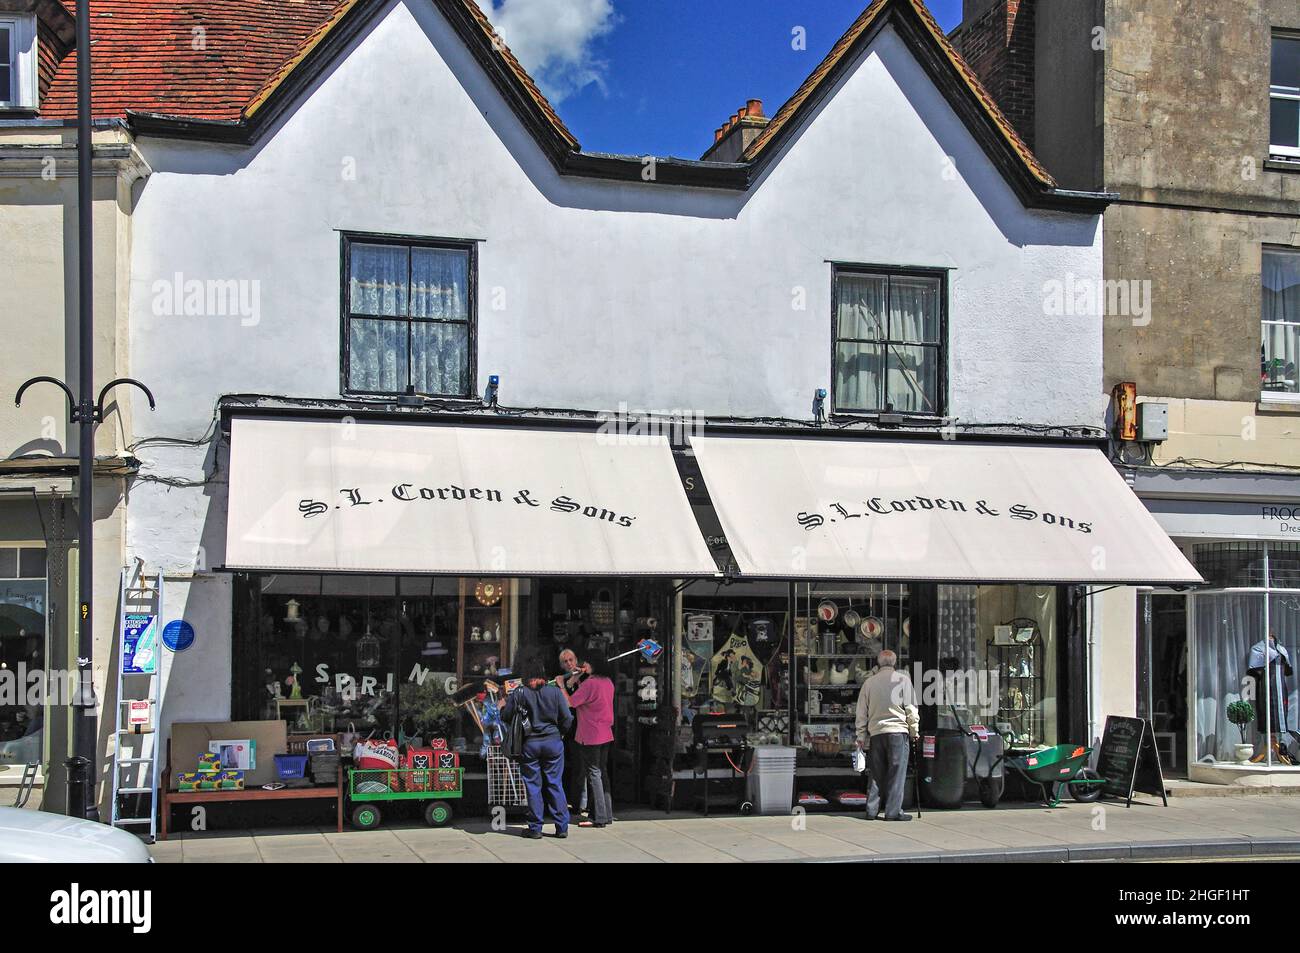 S.L.Corden & Sons Hardware Store, High Street, Salisbury, Wiltshire, Angleterre, Royaume-Uni Banque D'Images